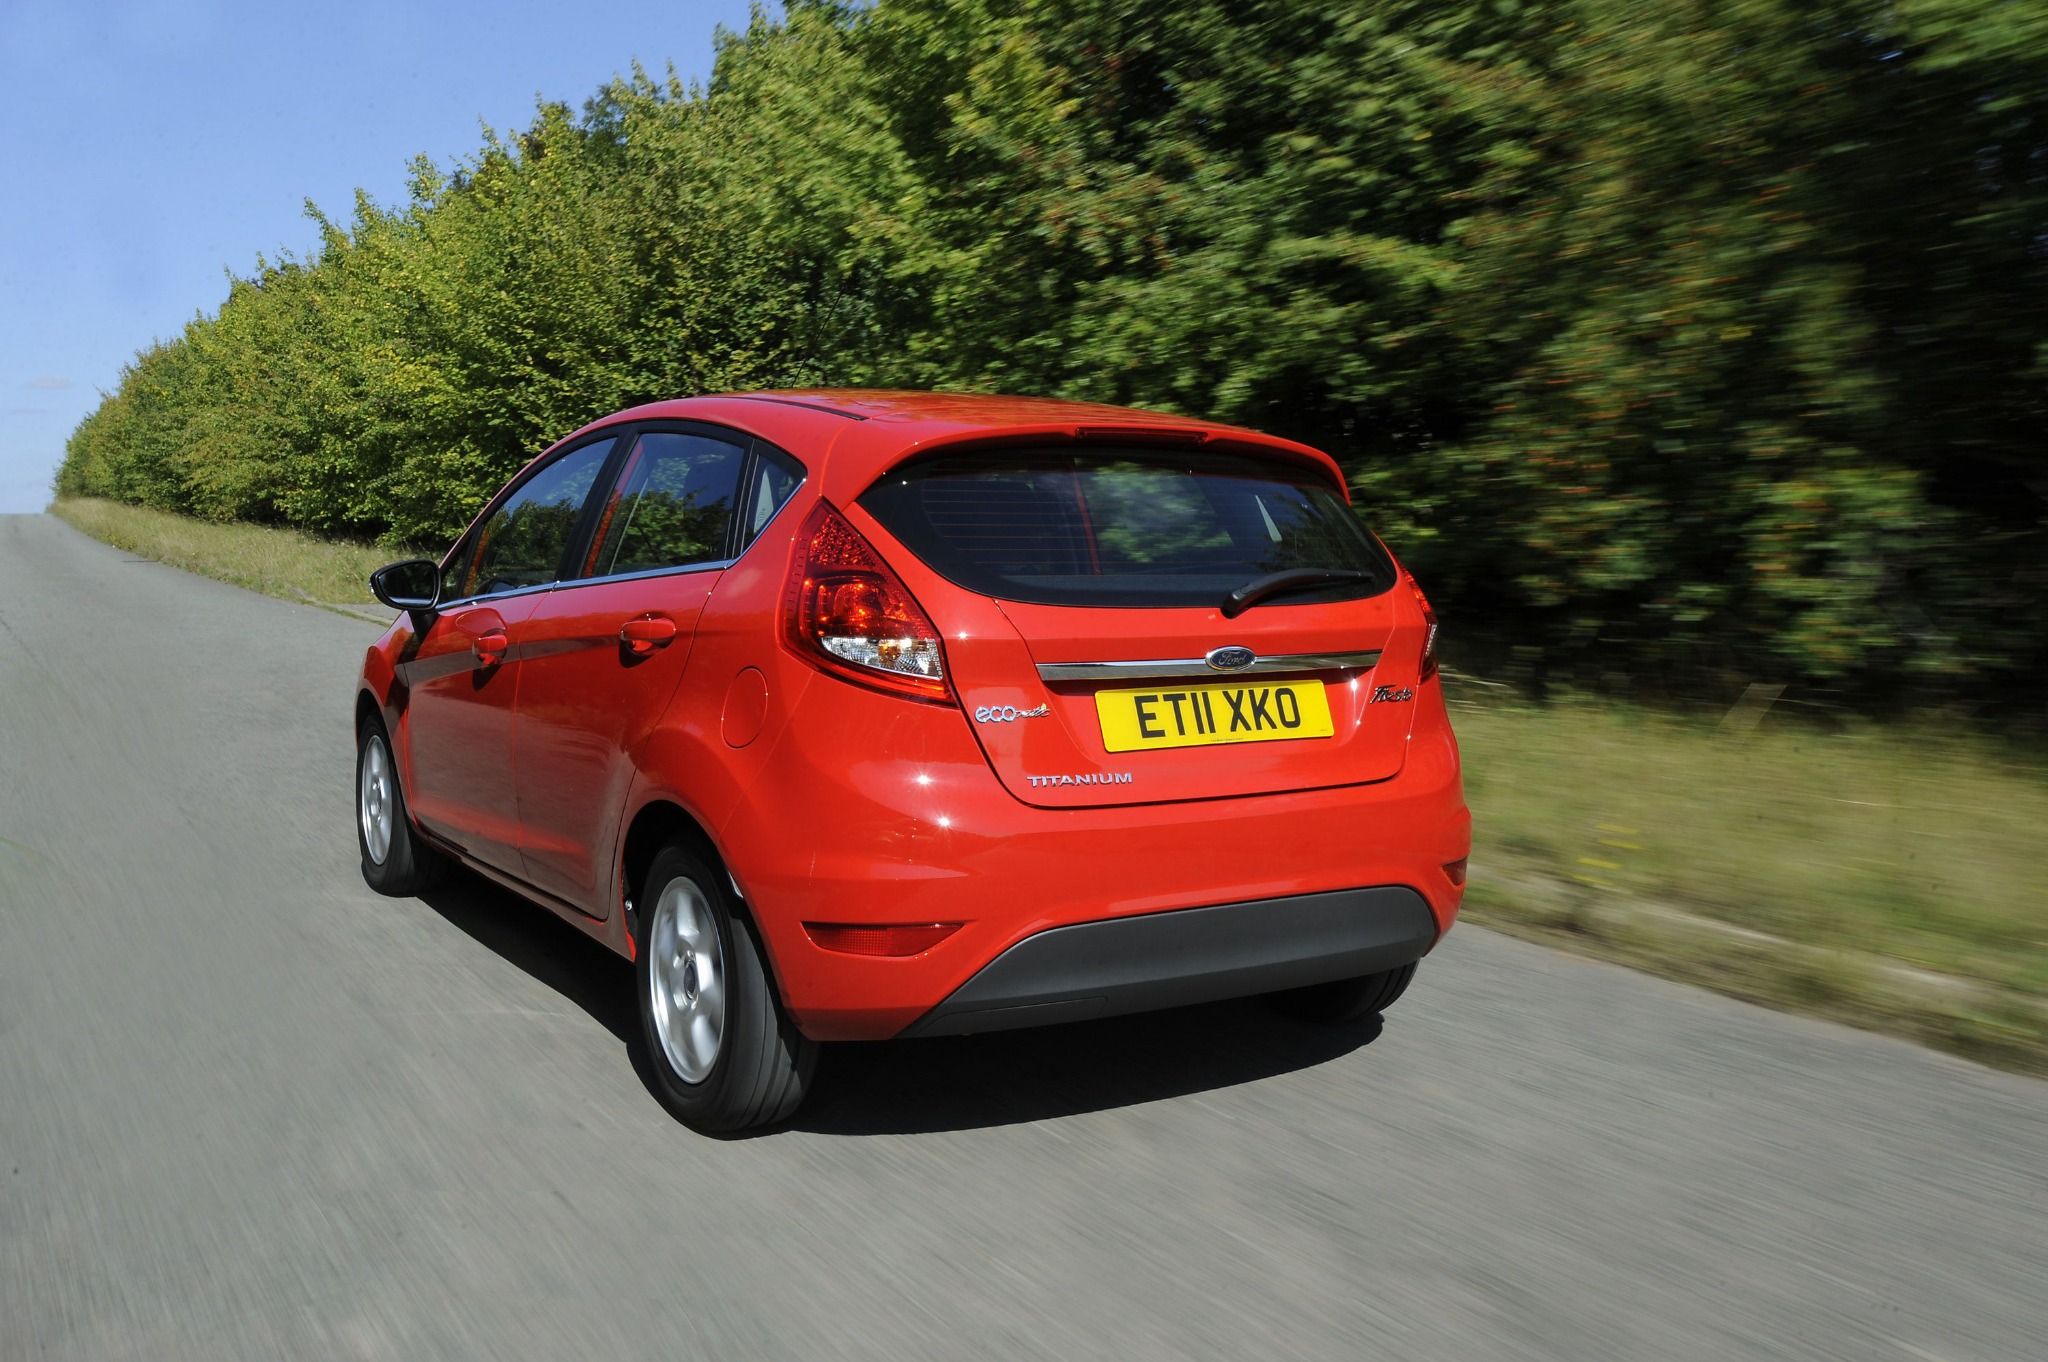 rear view of a red ford fiesta driving down a road with trees on the side